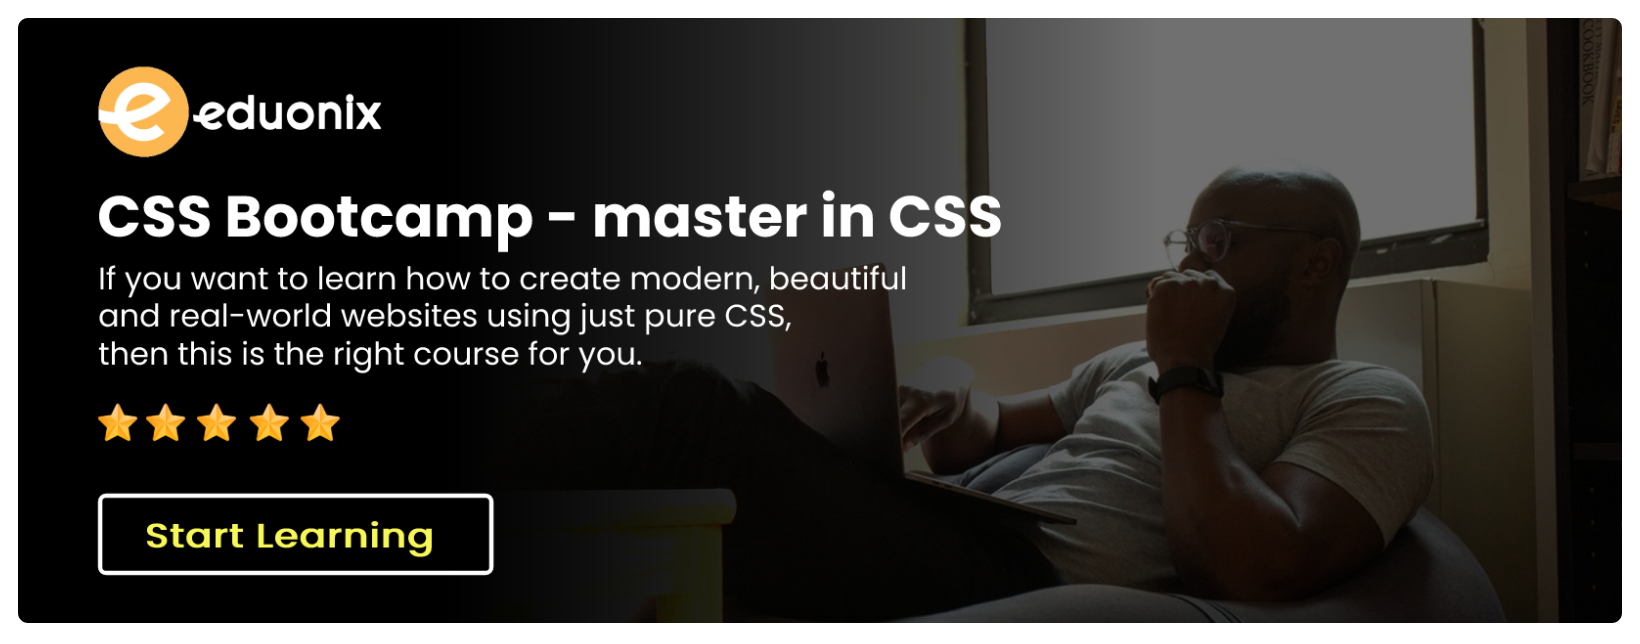 CSS Bootcamp - Master in CSS